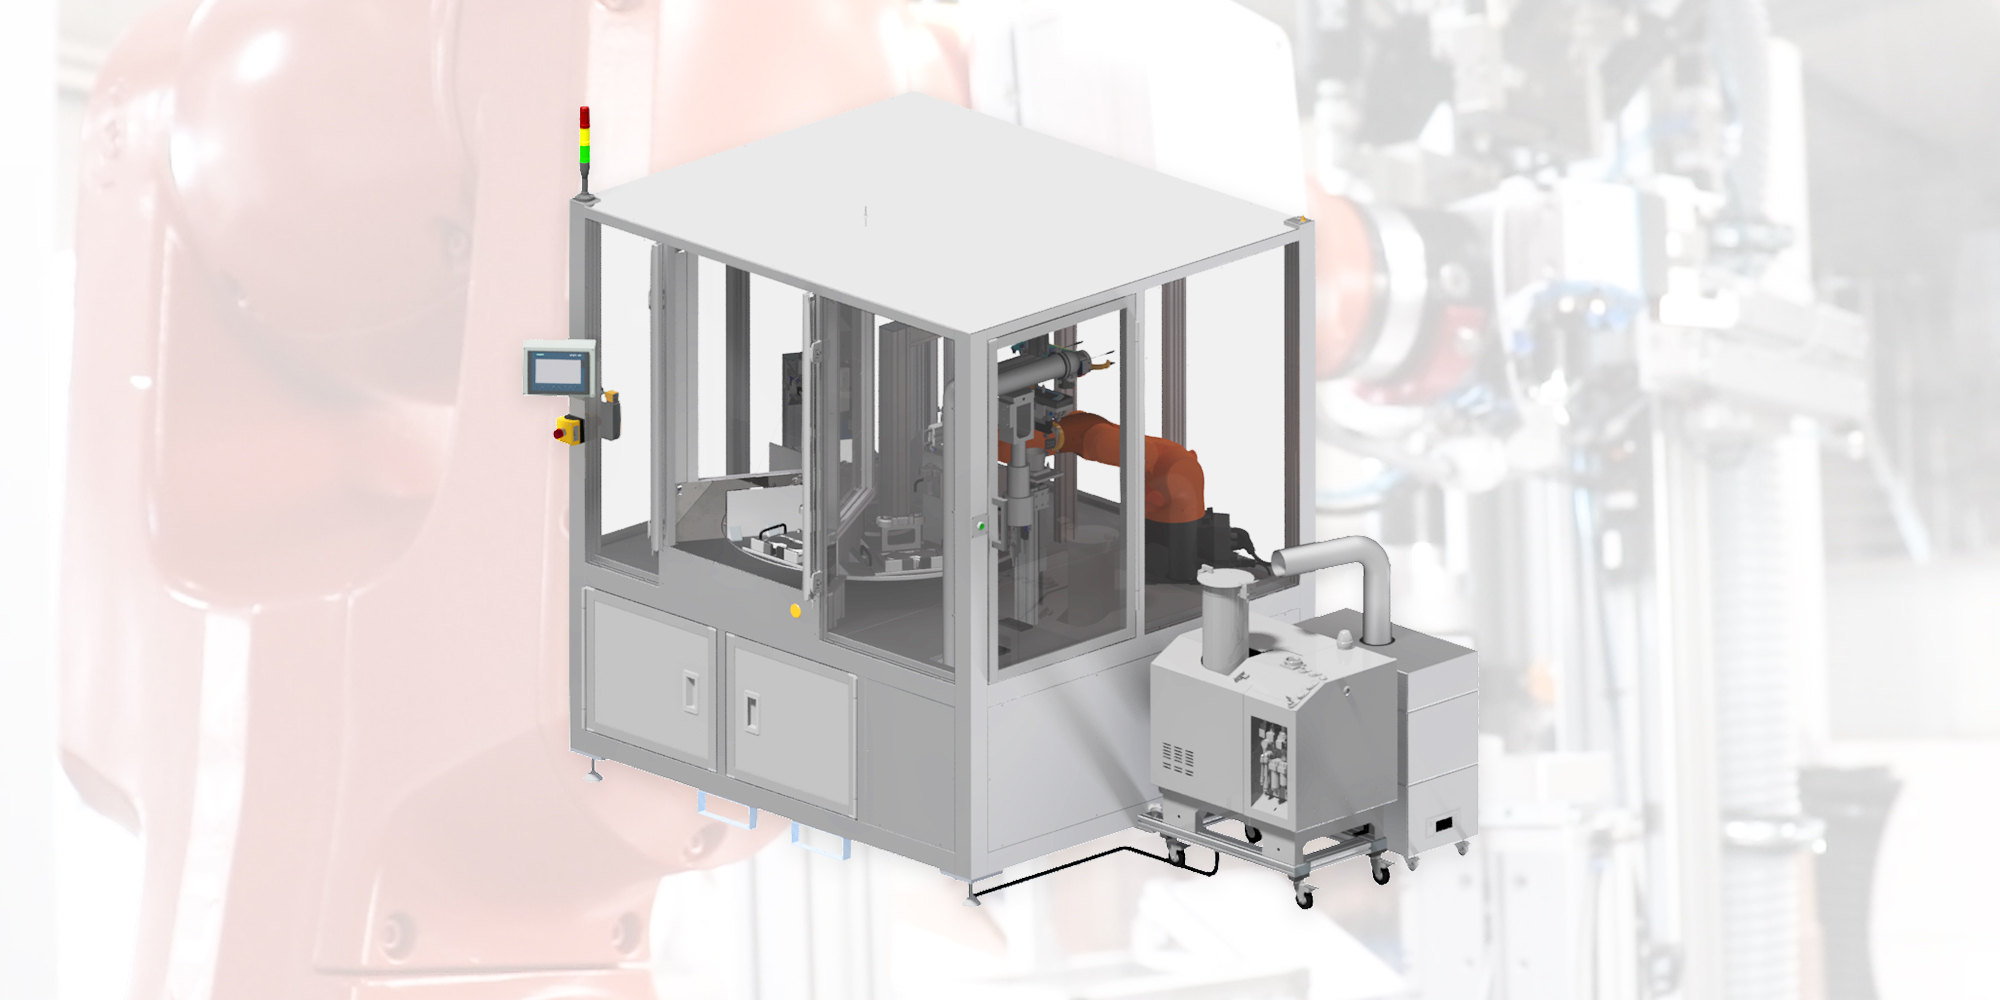 Semi-automated gluing system with IO-Link sensor technology